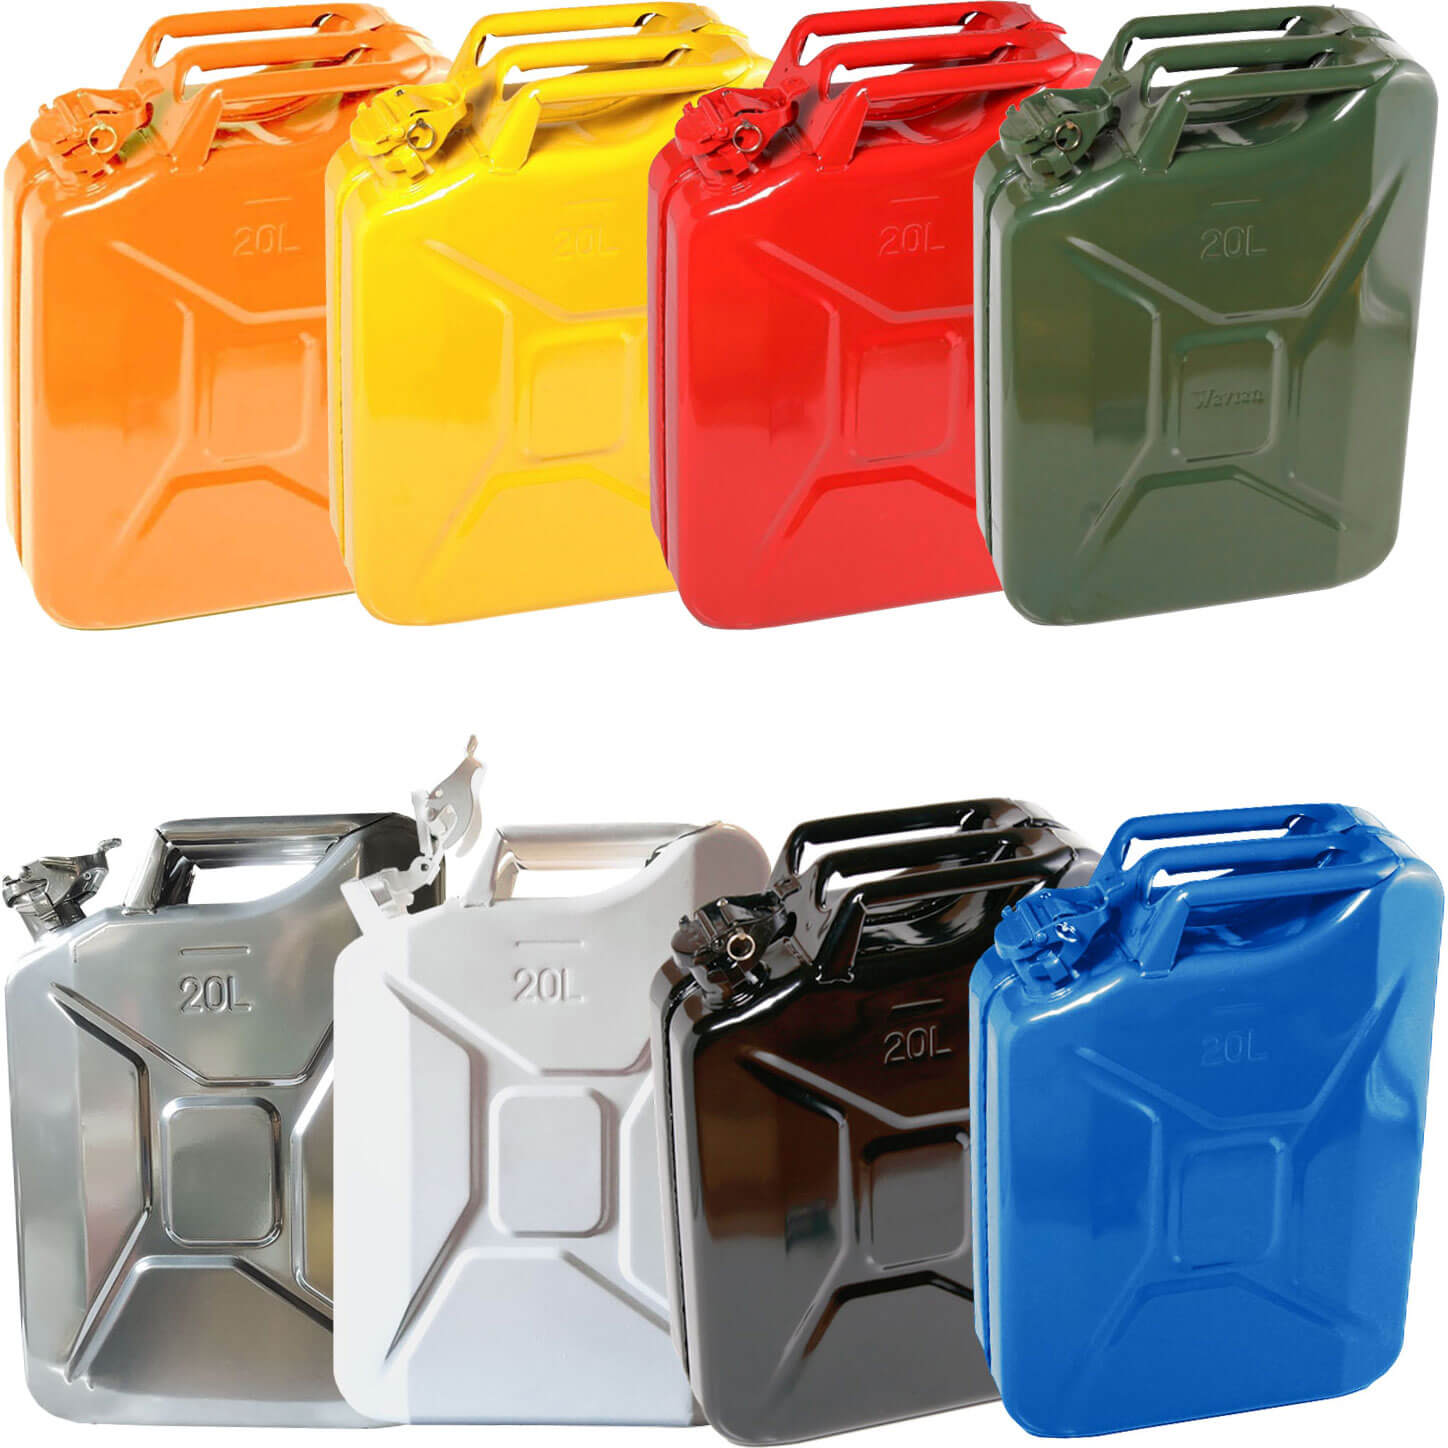 Sirius Steel Jerry Can Holder 20l 